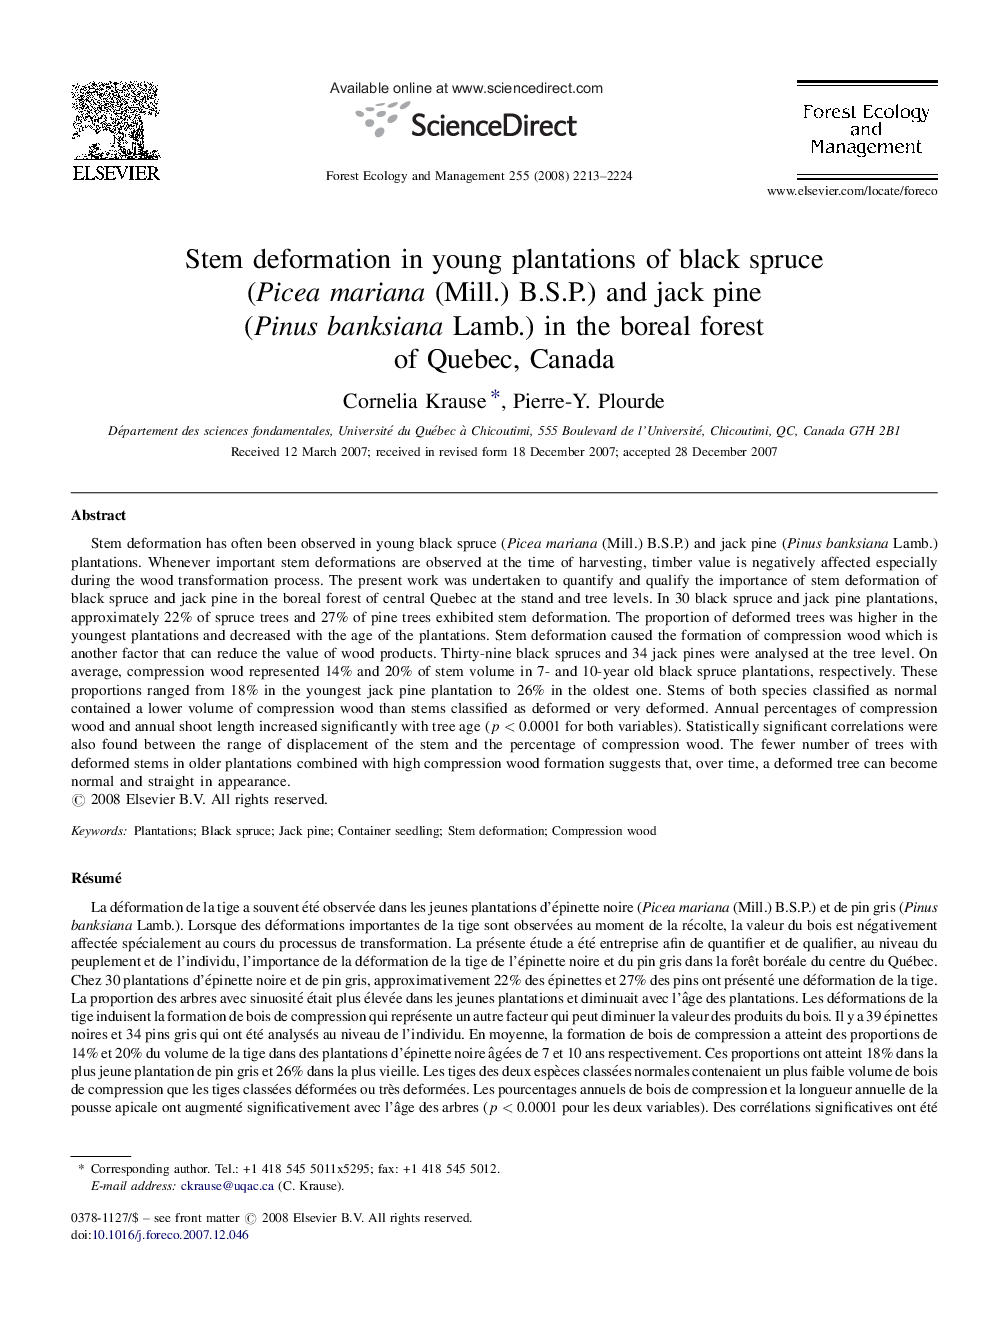 Stem deformation in young plantations of black spruce (Picea mariana (Mill.) B.S.P.) and jack pine (Pinus banksiana Lamb.) in the boreal forest of Quebec, Canada